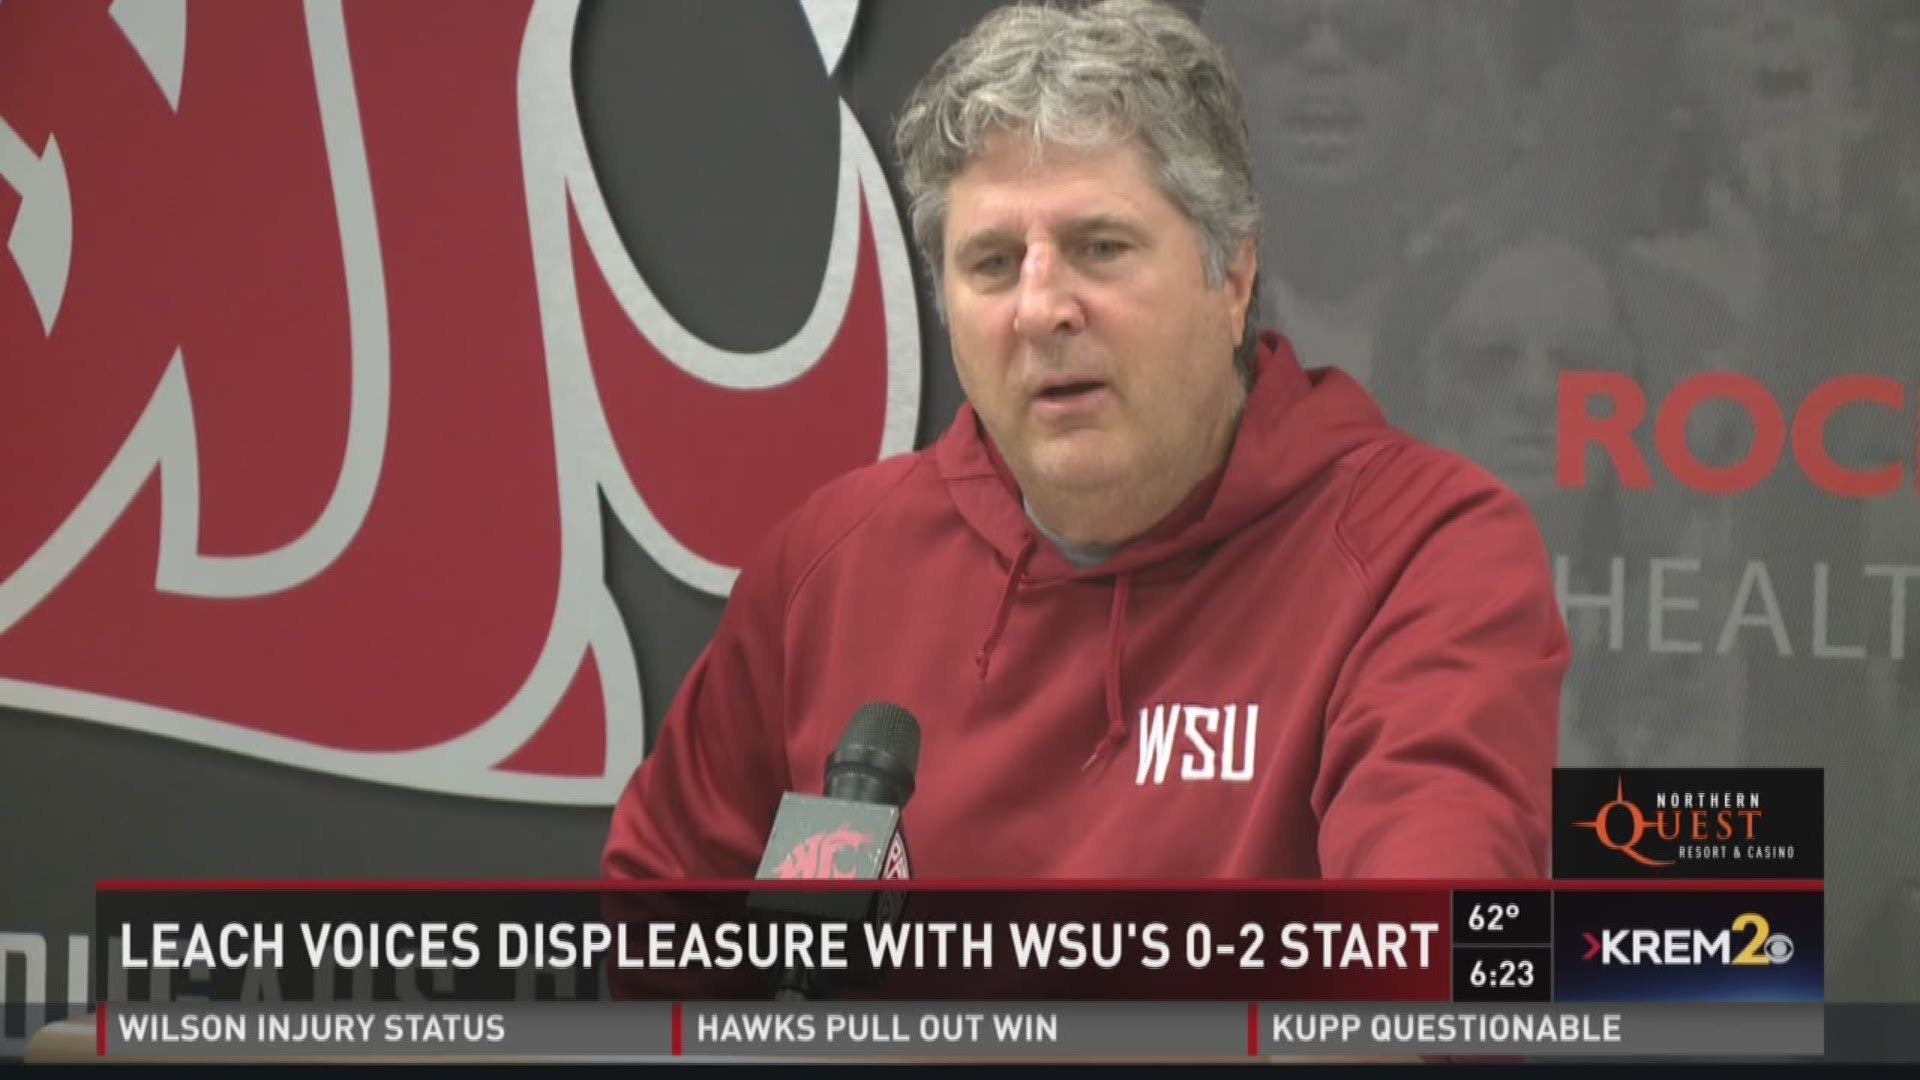 Washington State head coach Mike Leach minced zero words when it came to talking about his team's, 0-2, start to the season. Here's a snippet of what Leach had to say during Monday's press conference.